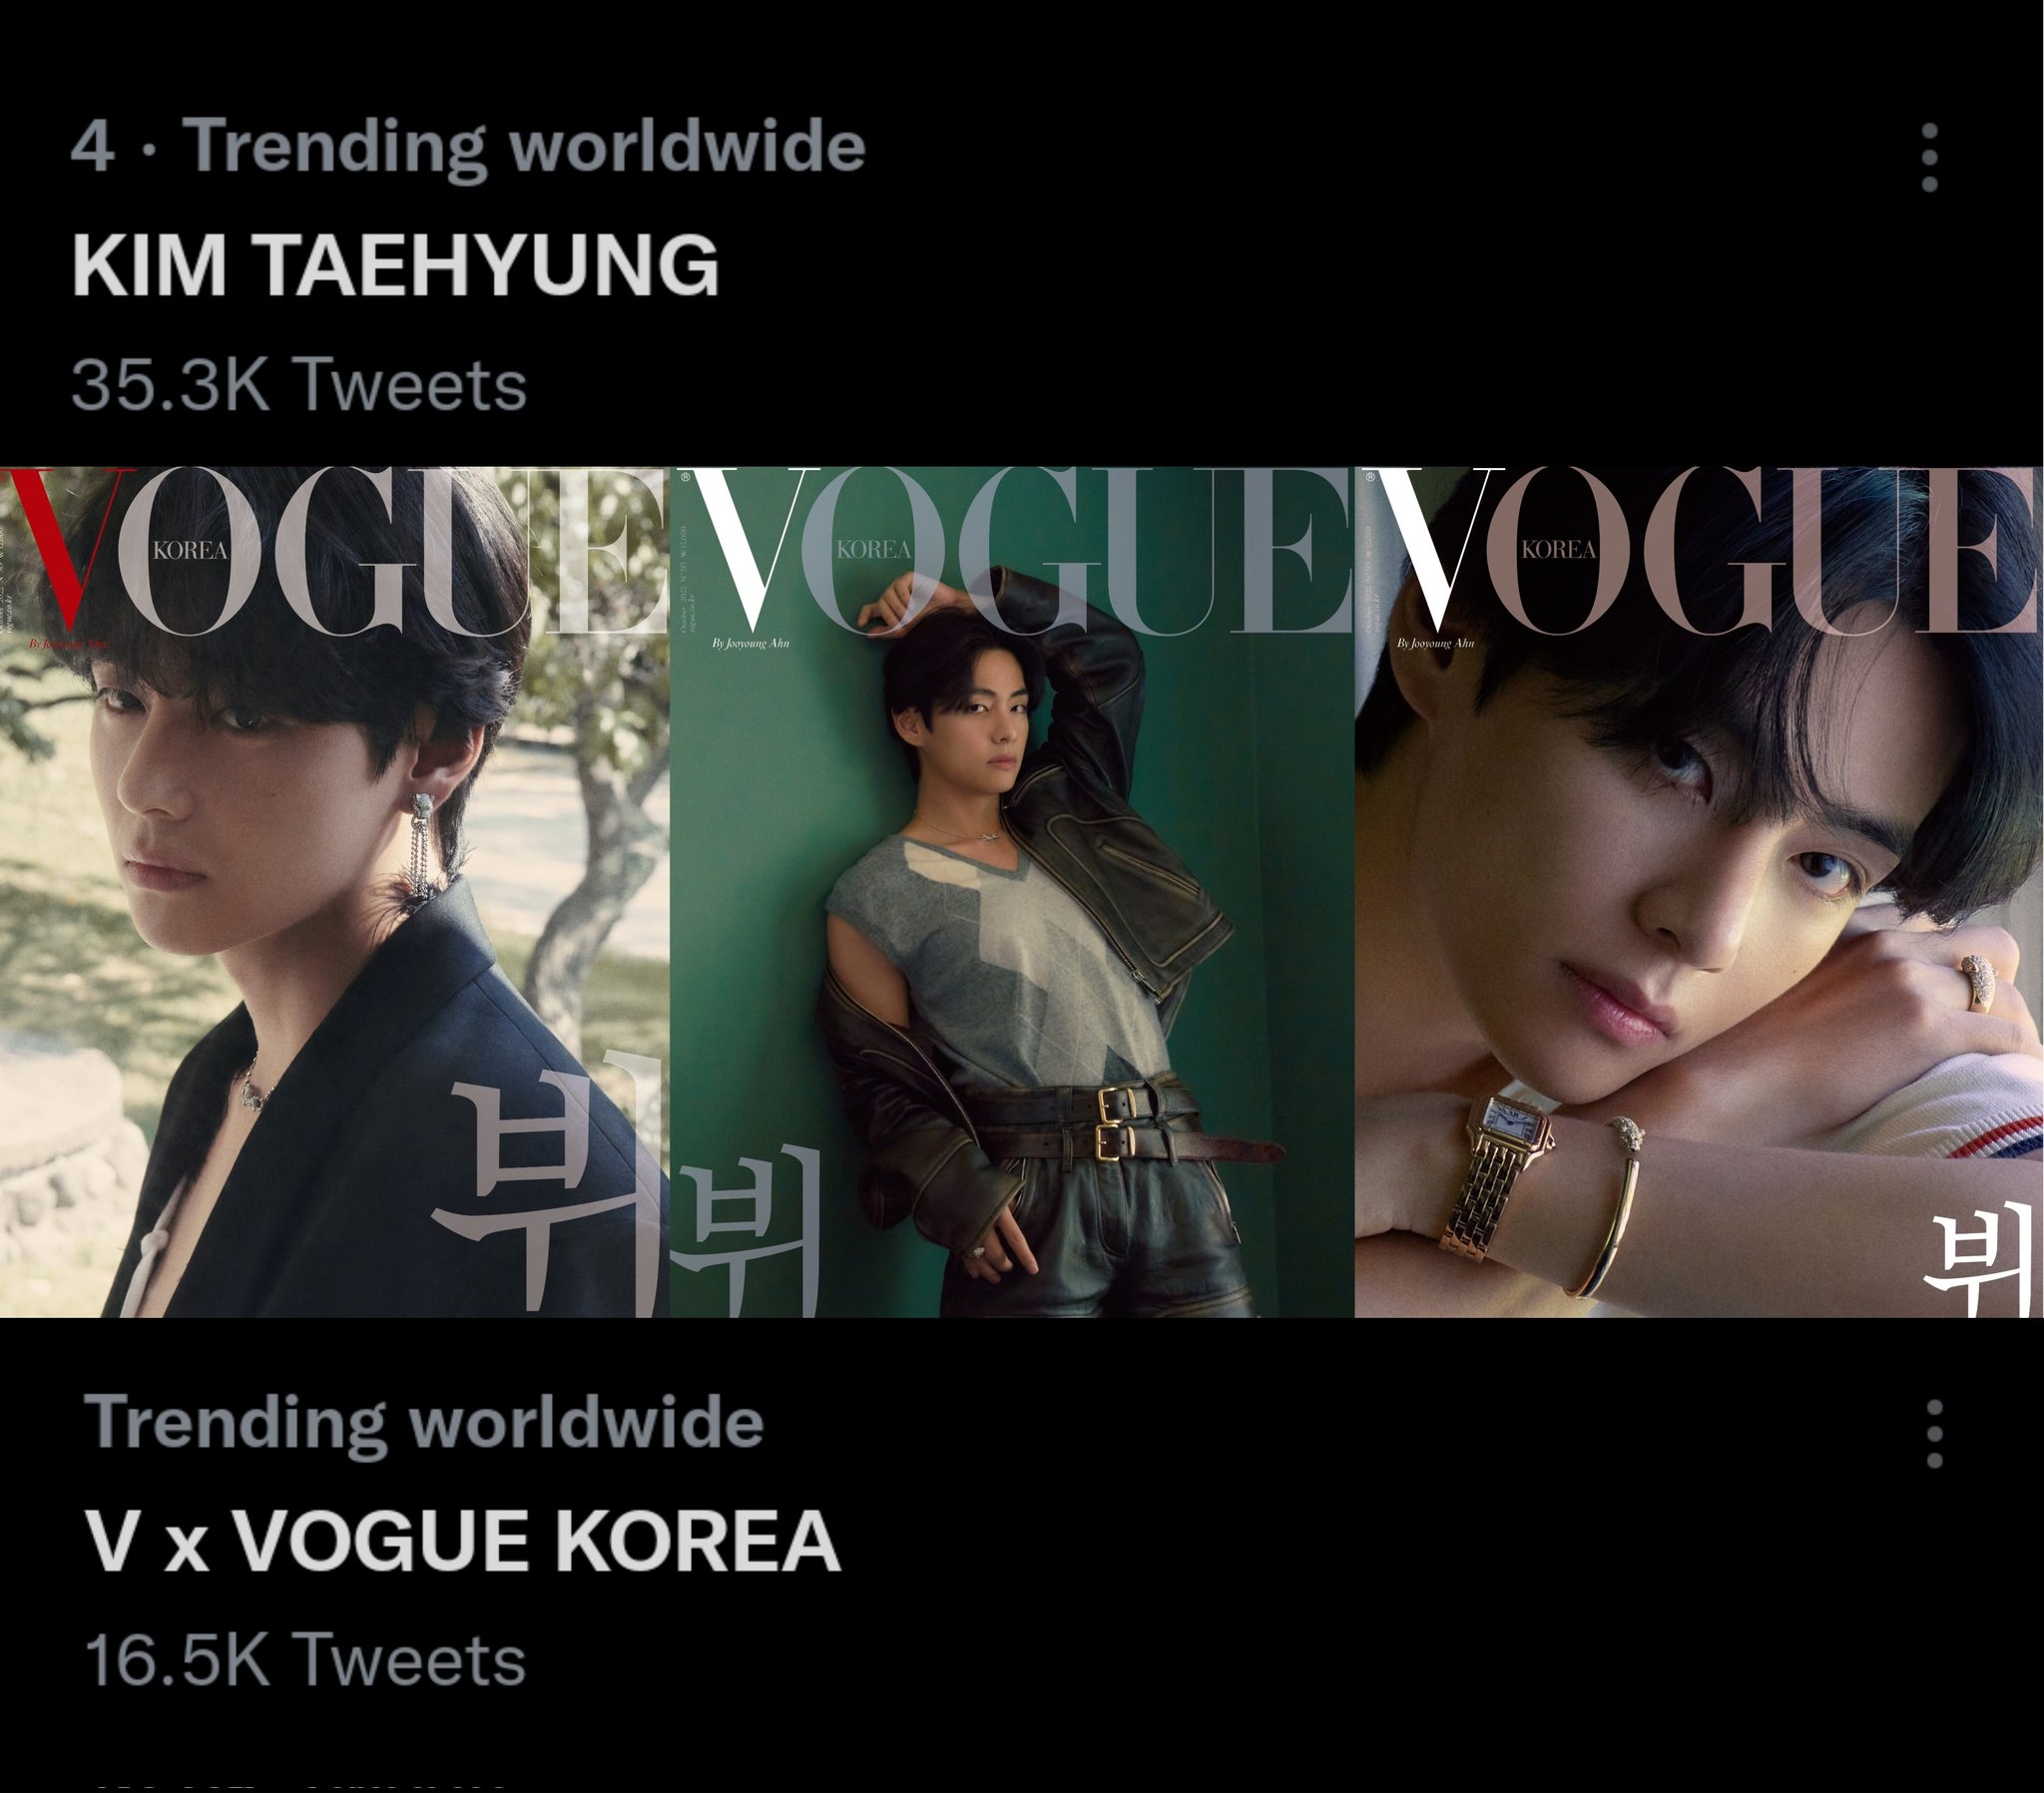 BTS V HOTRENDS on X: RT & REPLY Cartier WE LOVE YOU TAEHYUNG SOLD OUT  KING KIM TAEHYUNG Celine Kim Taehyung GLOBAL BRAND AMBASSADOR TAEHYUNG  #TAEHYUNGxCartier  / X